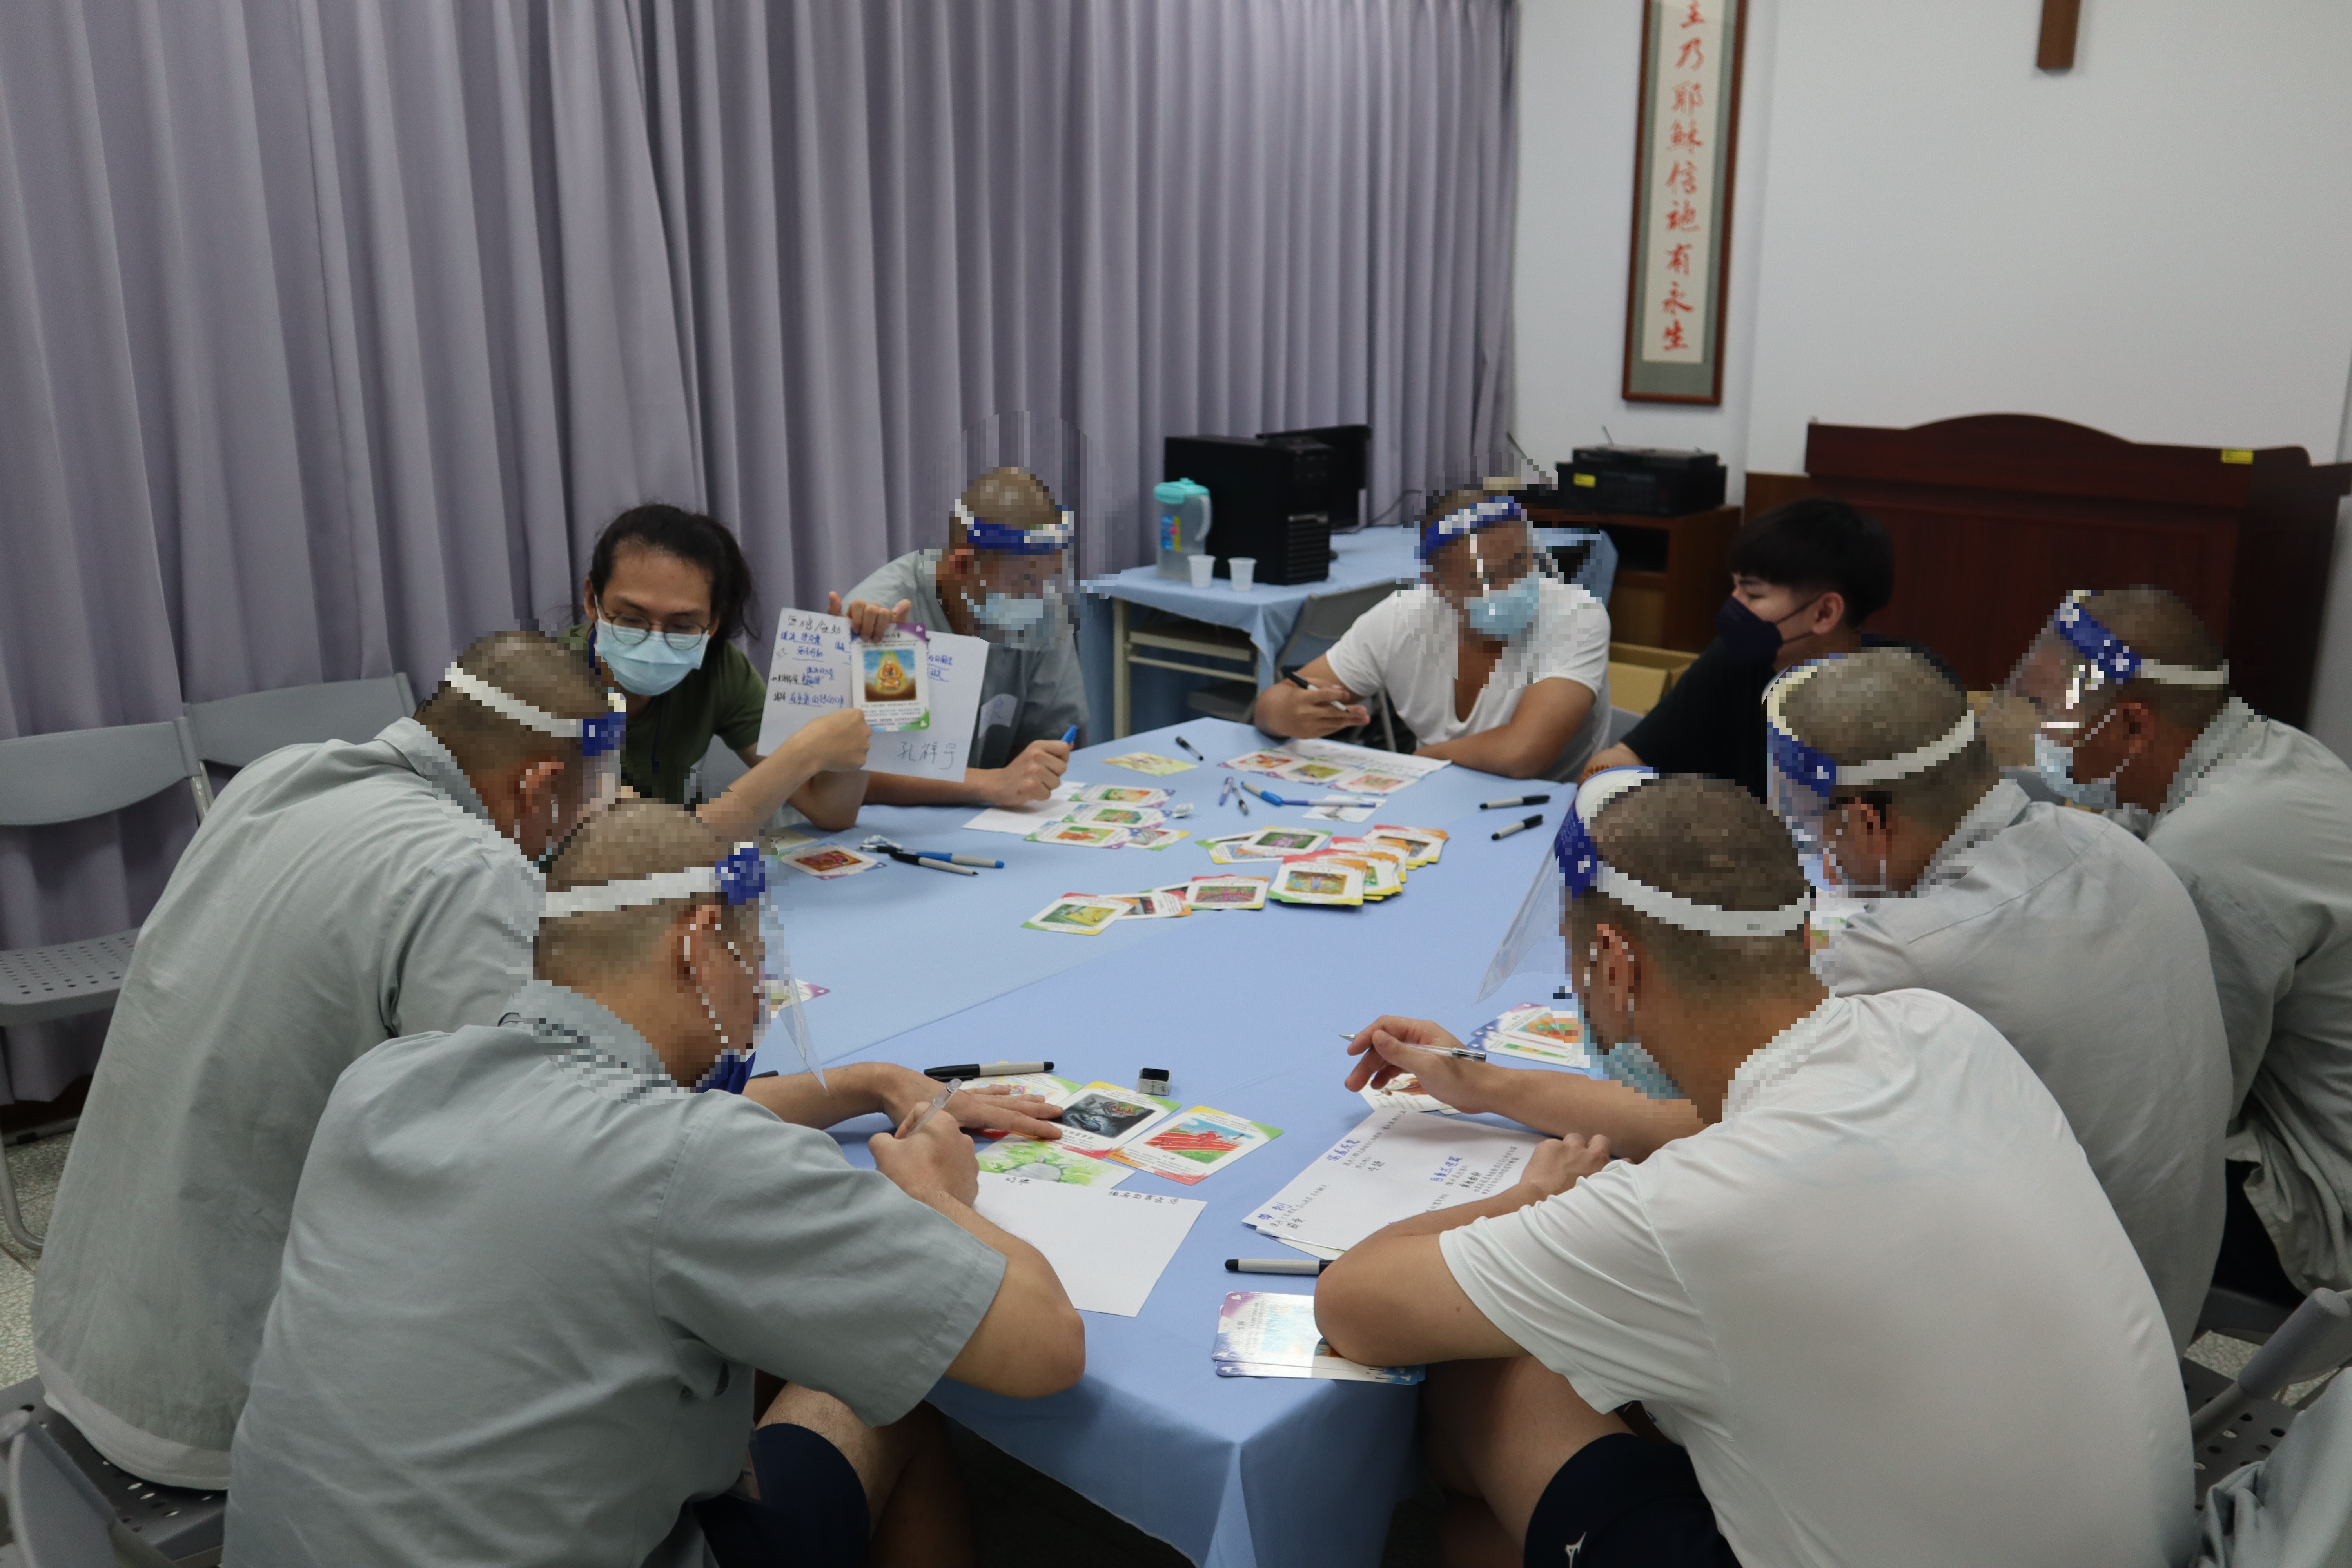 (Psychologists present their works and concepts to inmates)